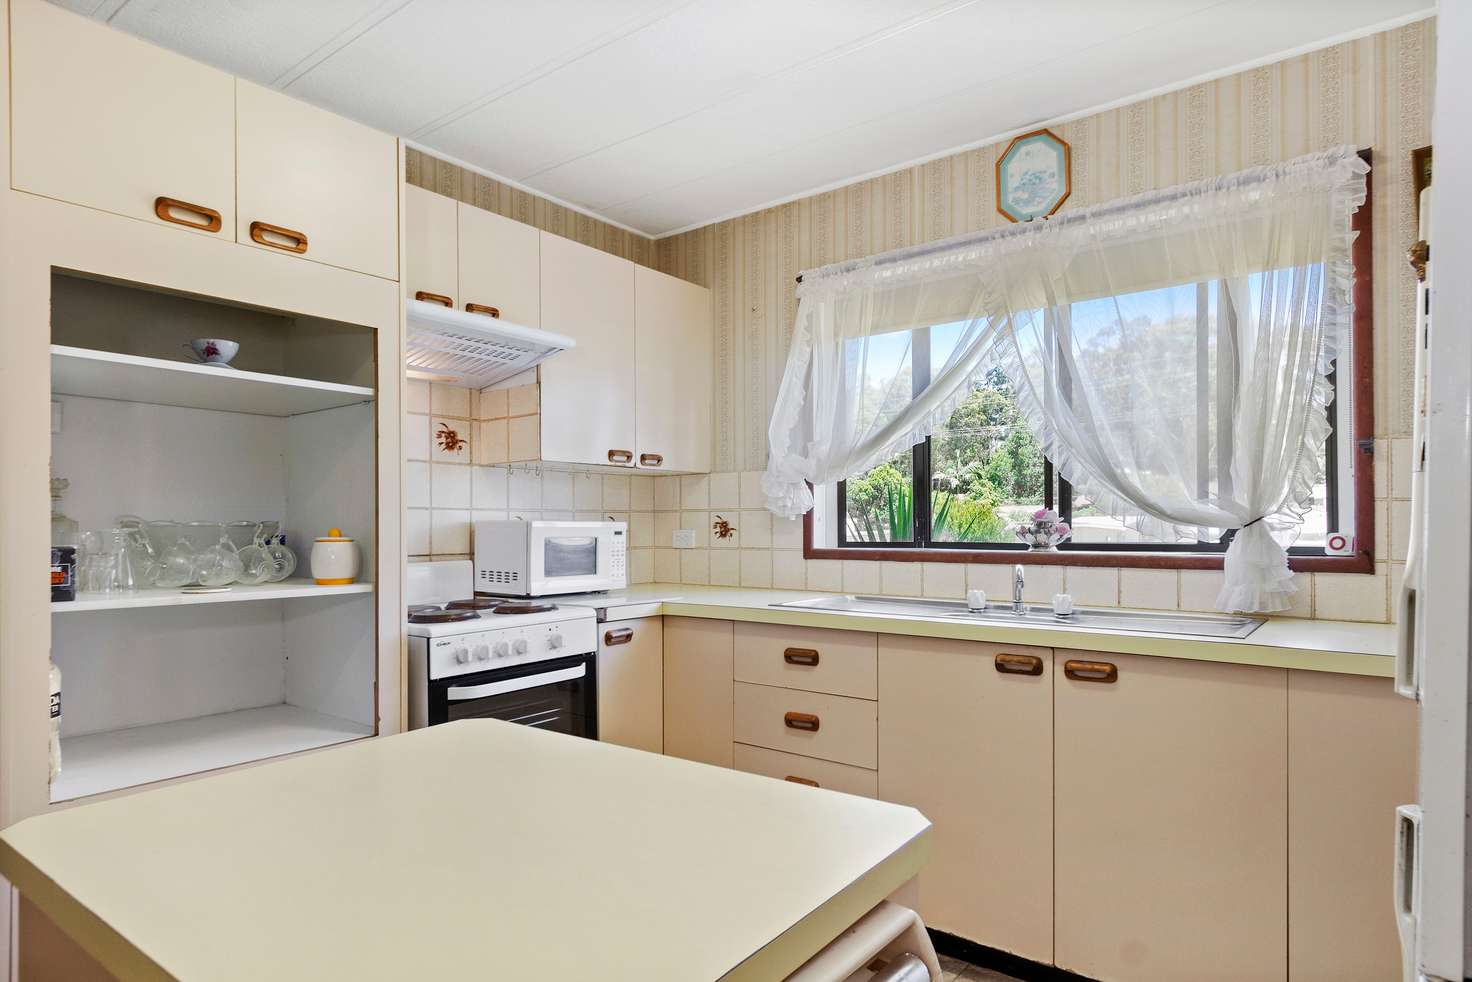 Main view of Homely house listing, 11 Clare Crescent, Batehaven NSW 2536